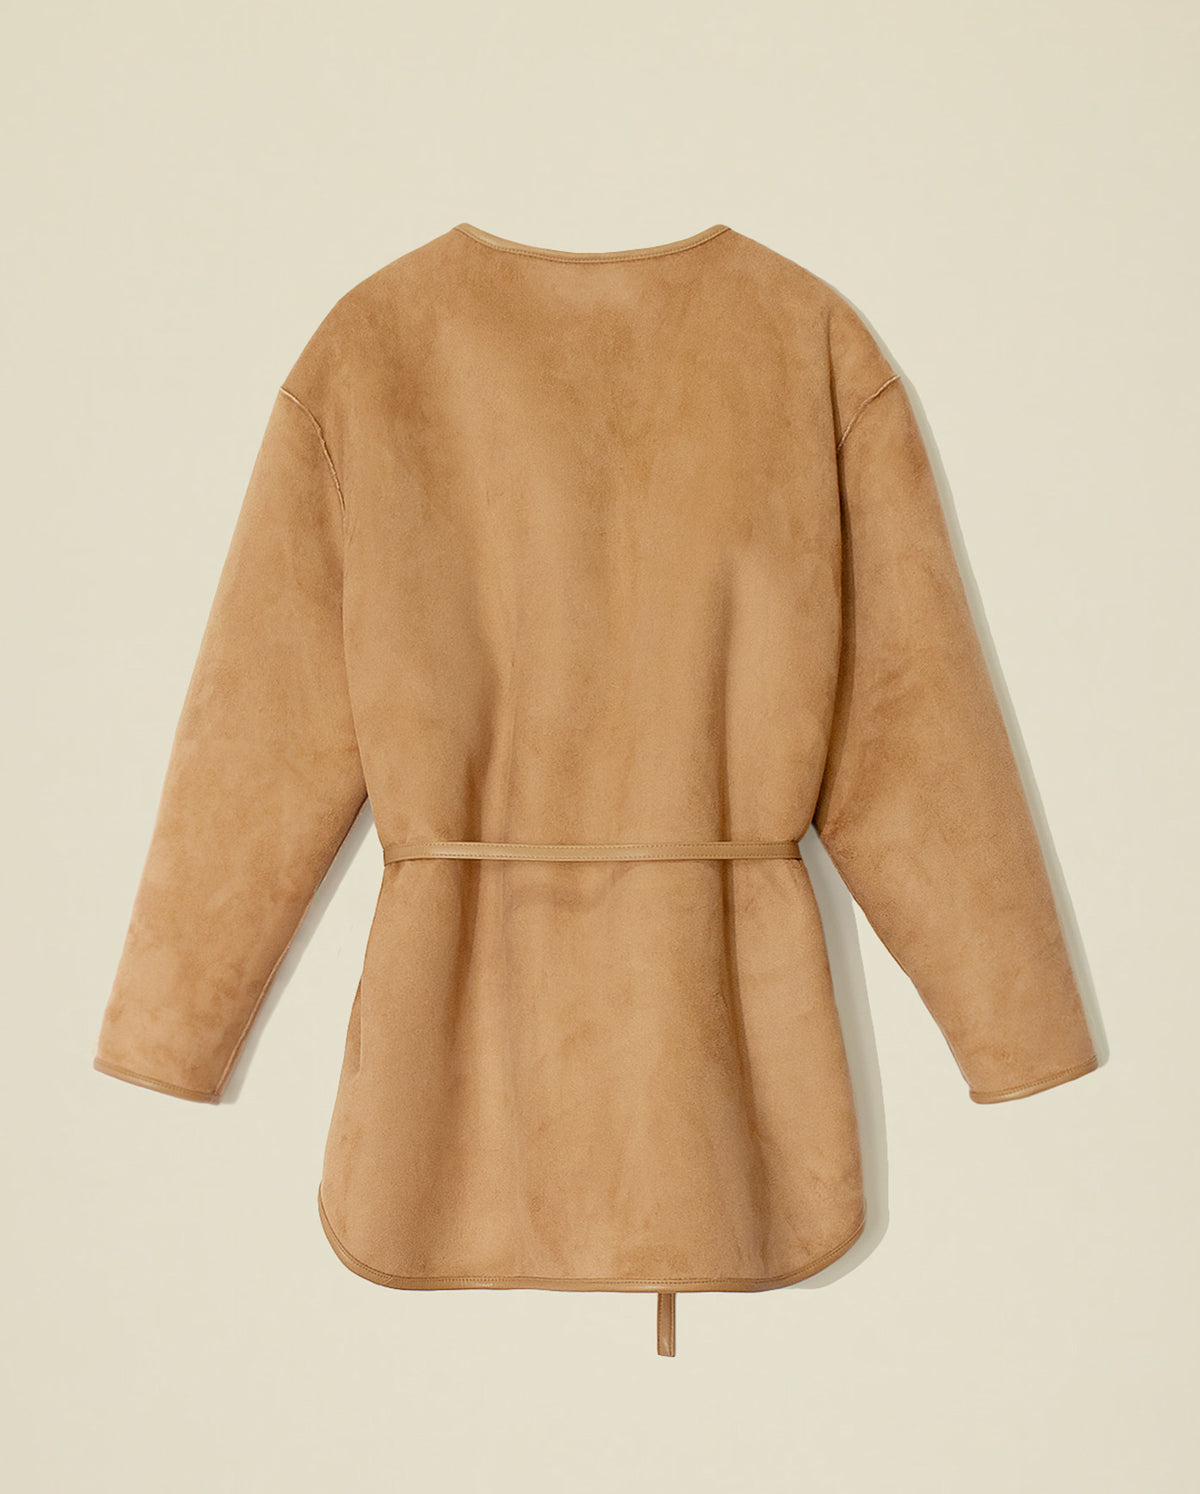 Sinclair Suede Coat - Driftwood